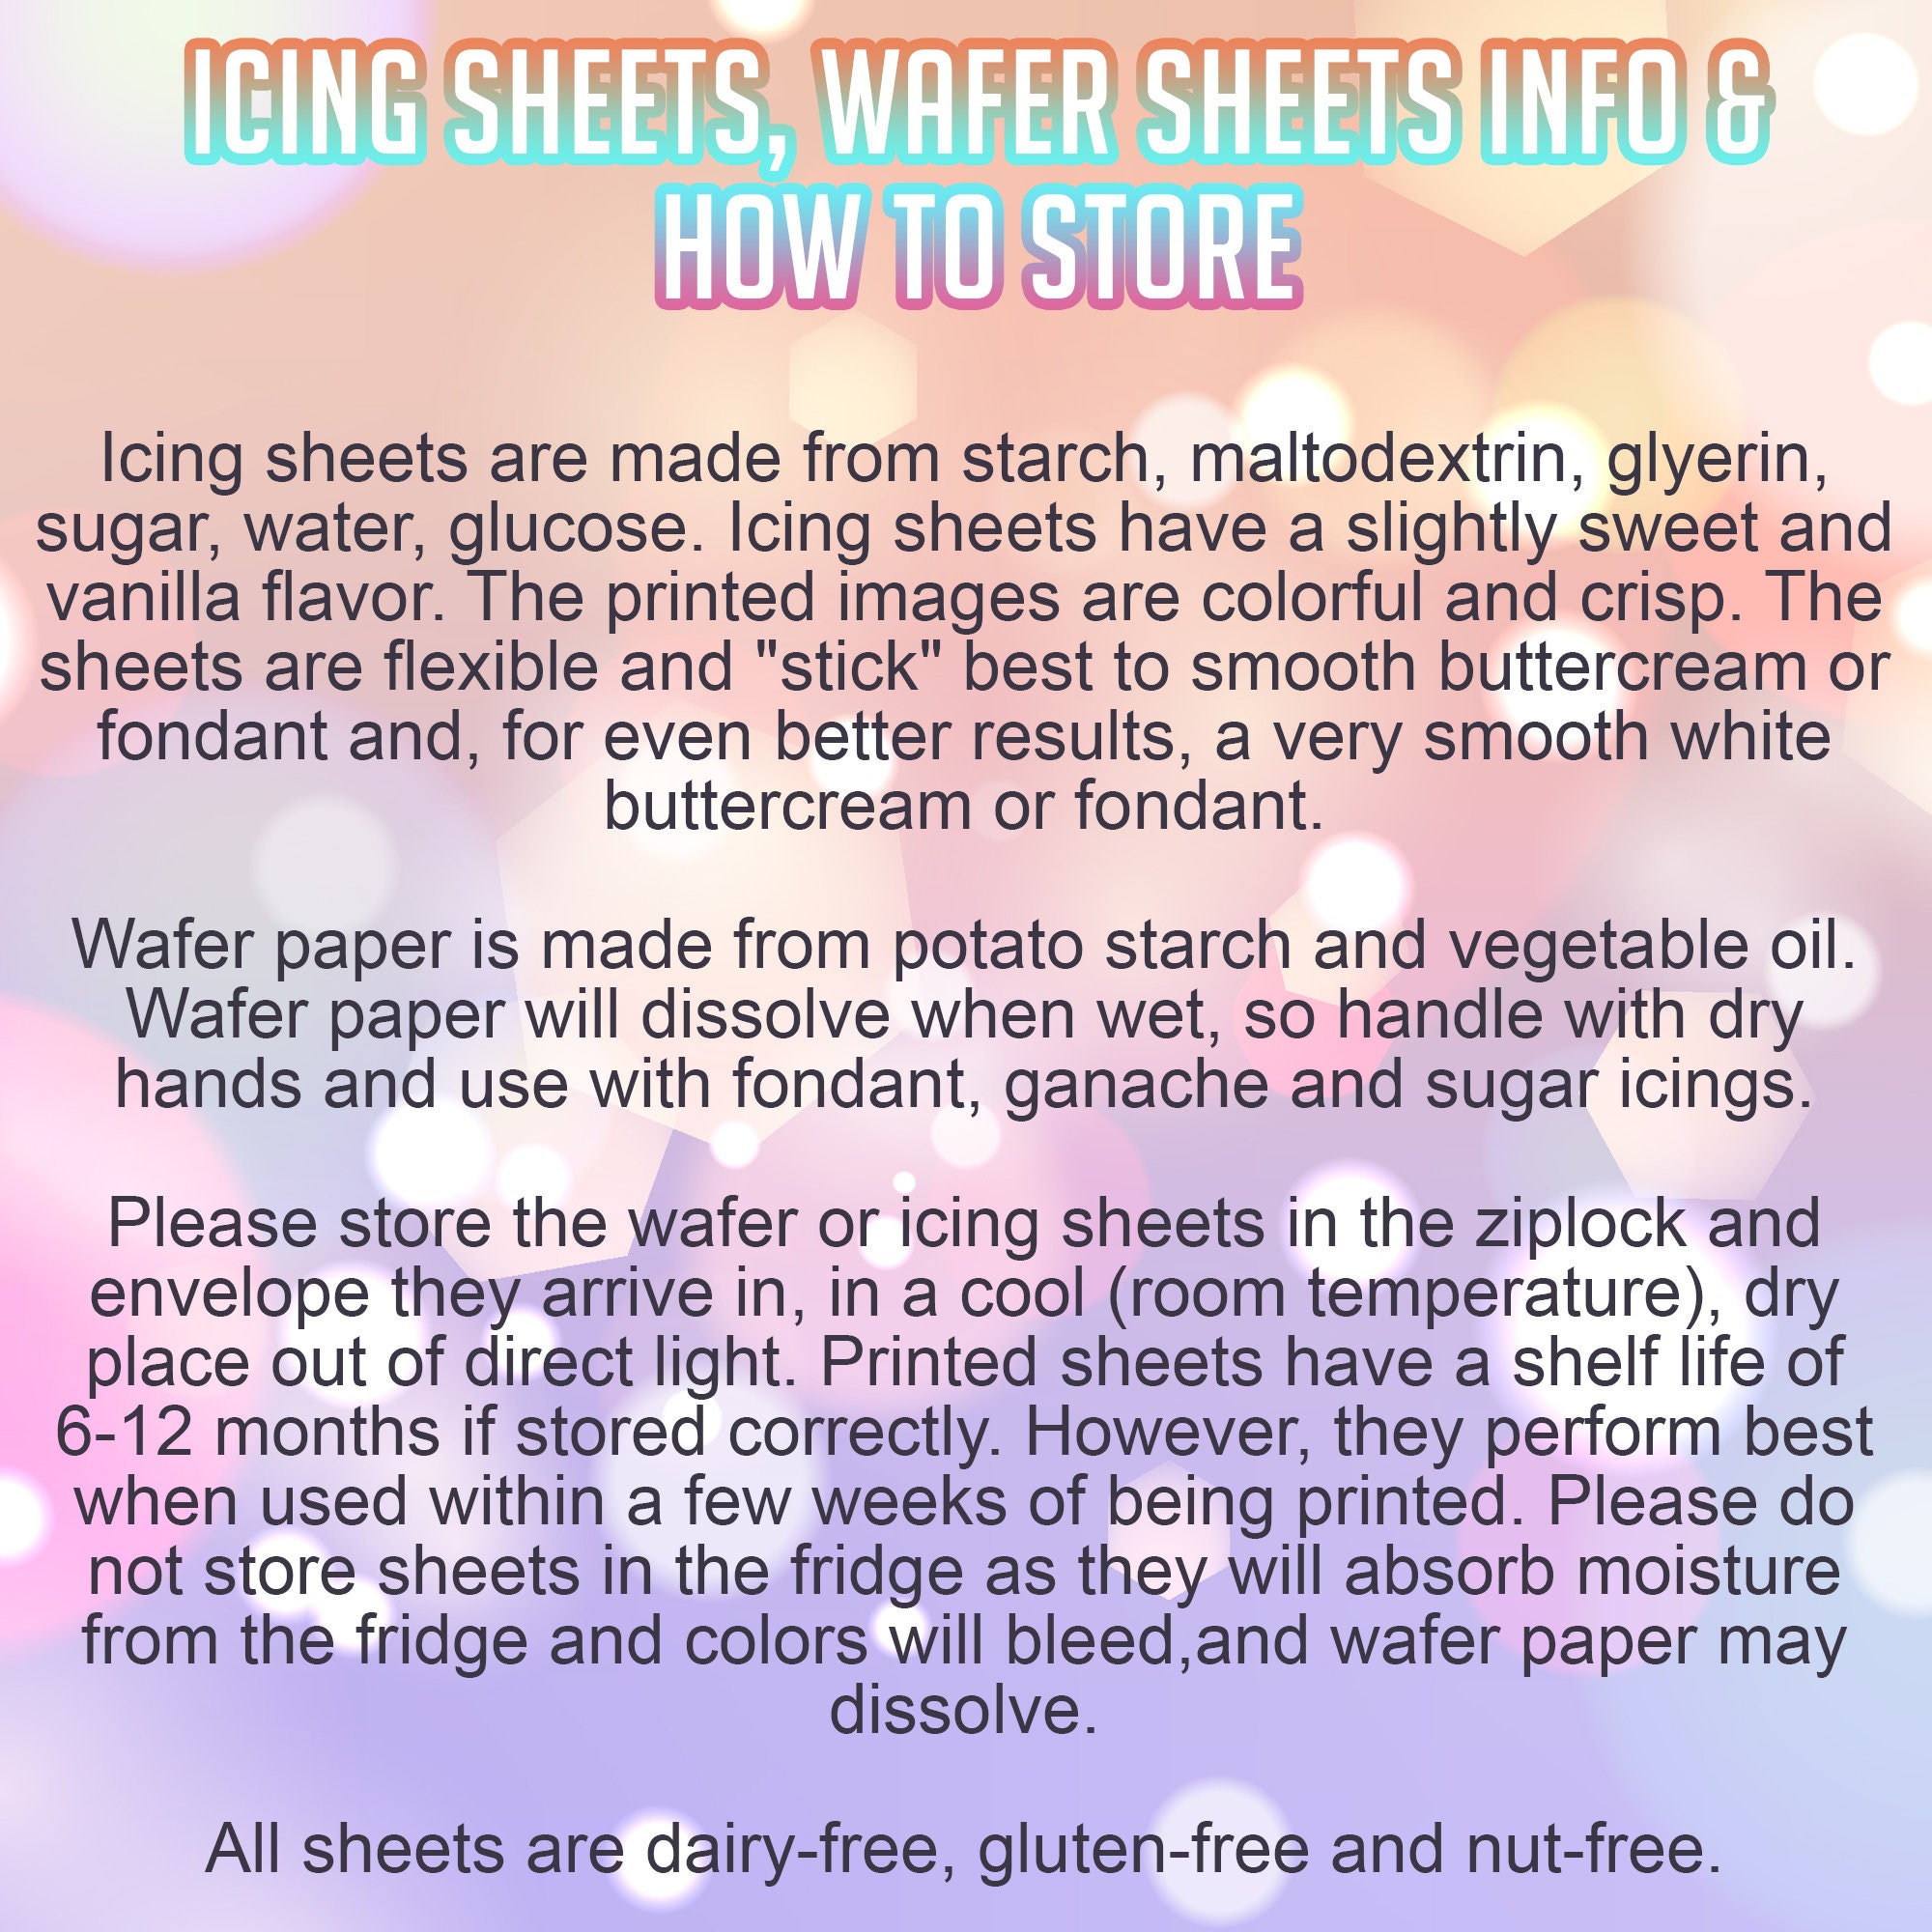 Frosting sheets and potato based wafer papers